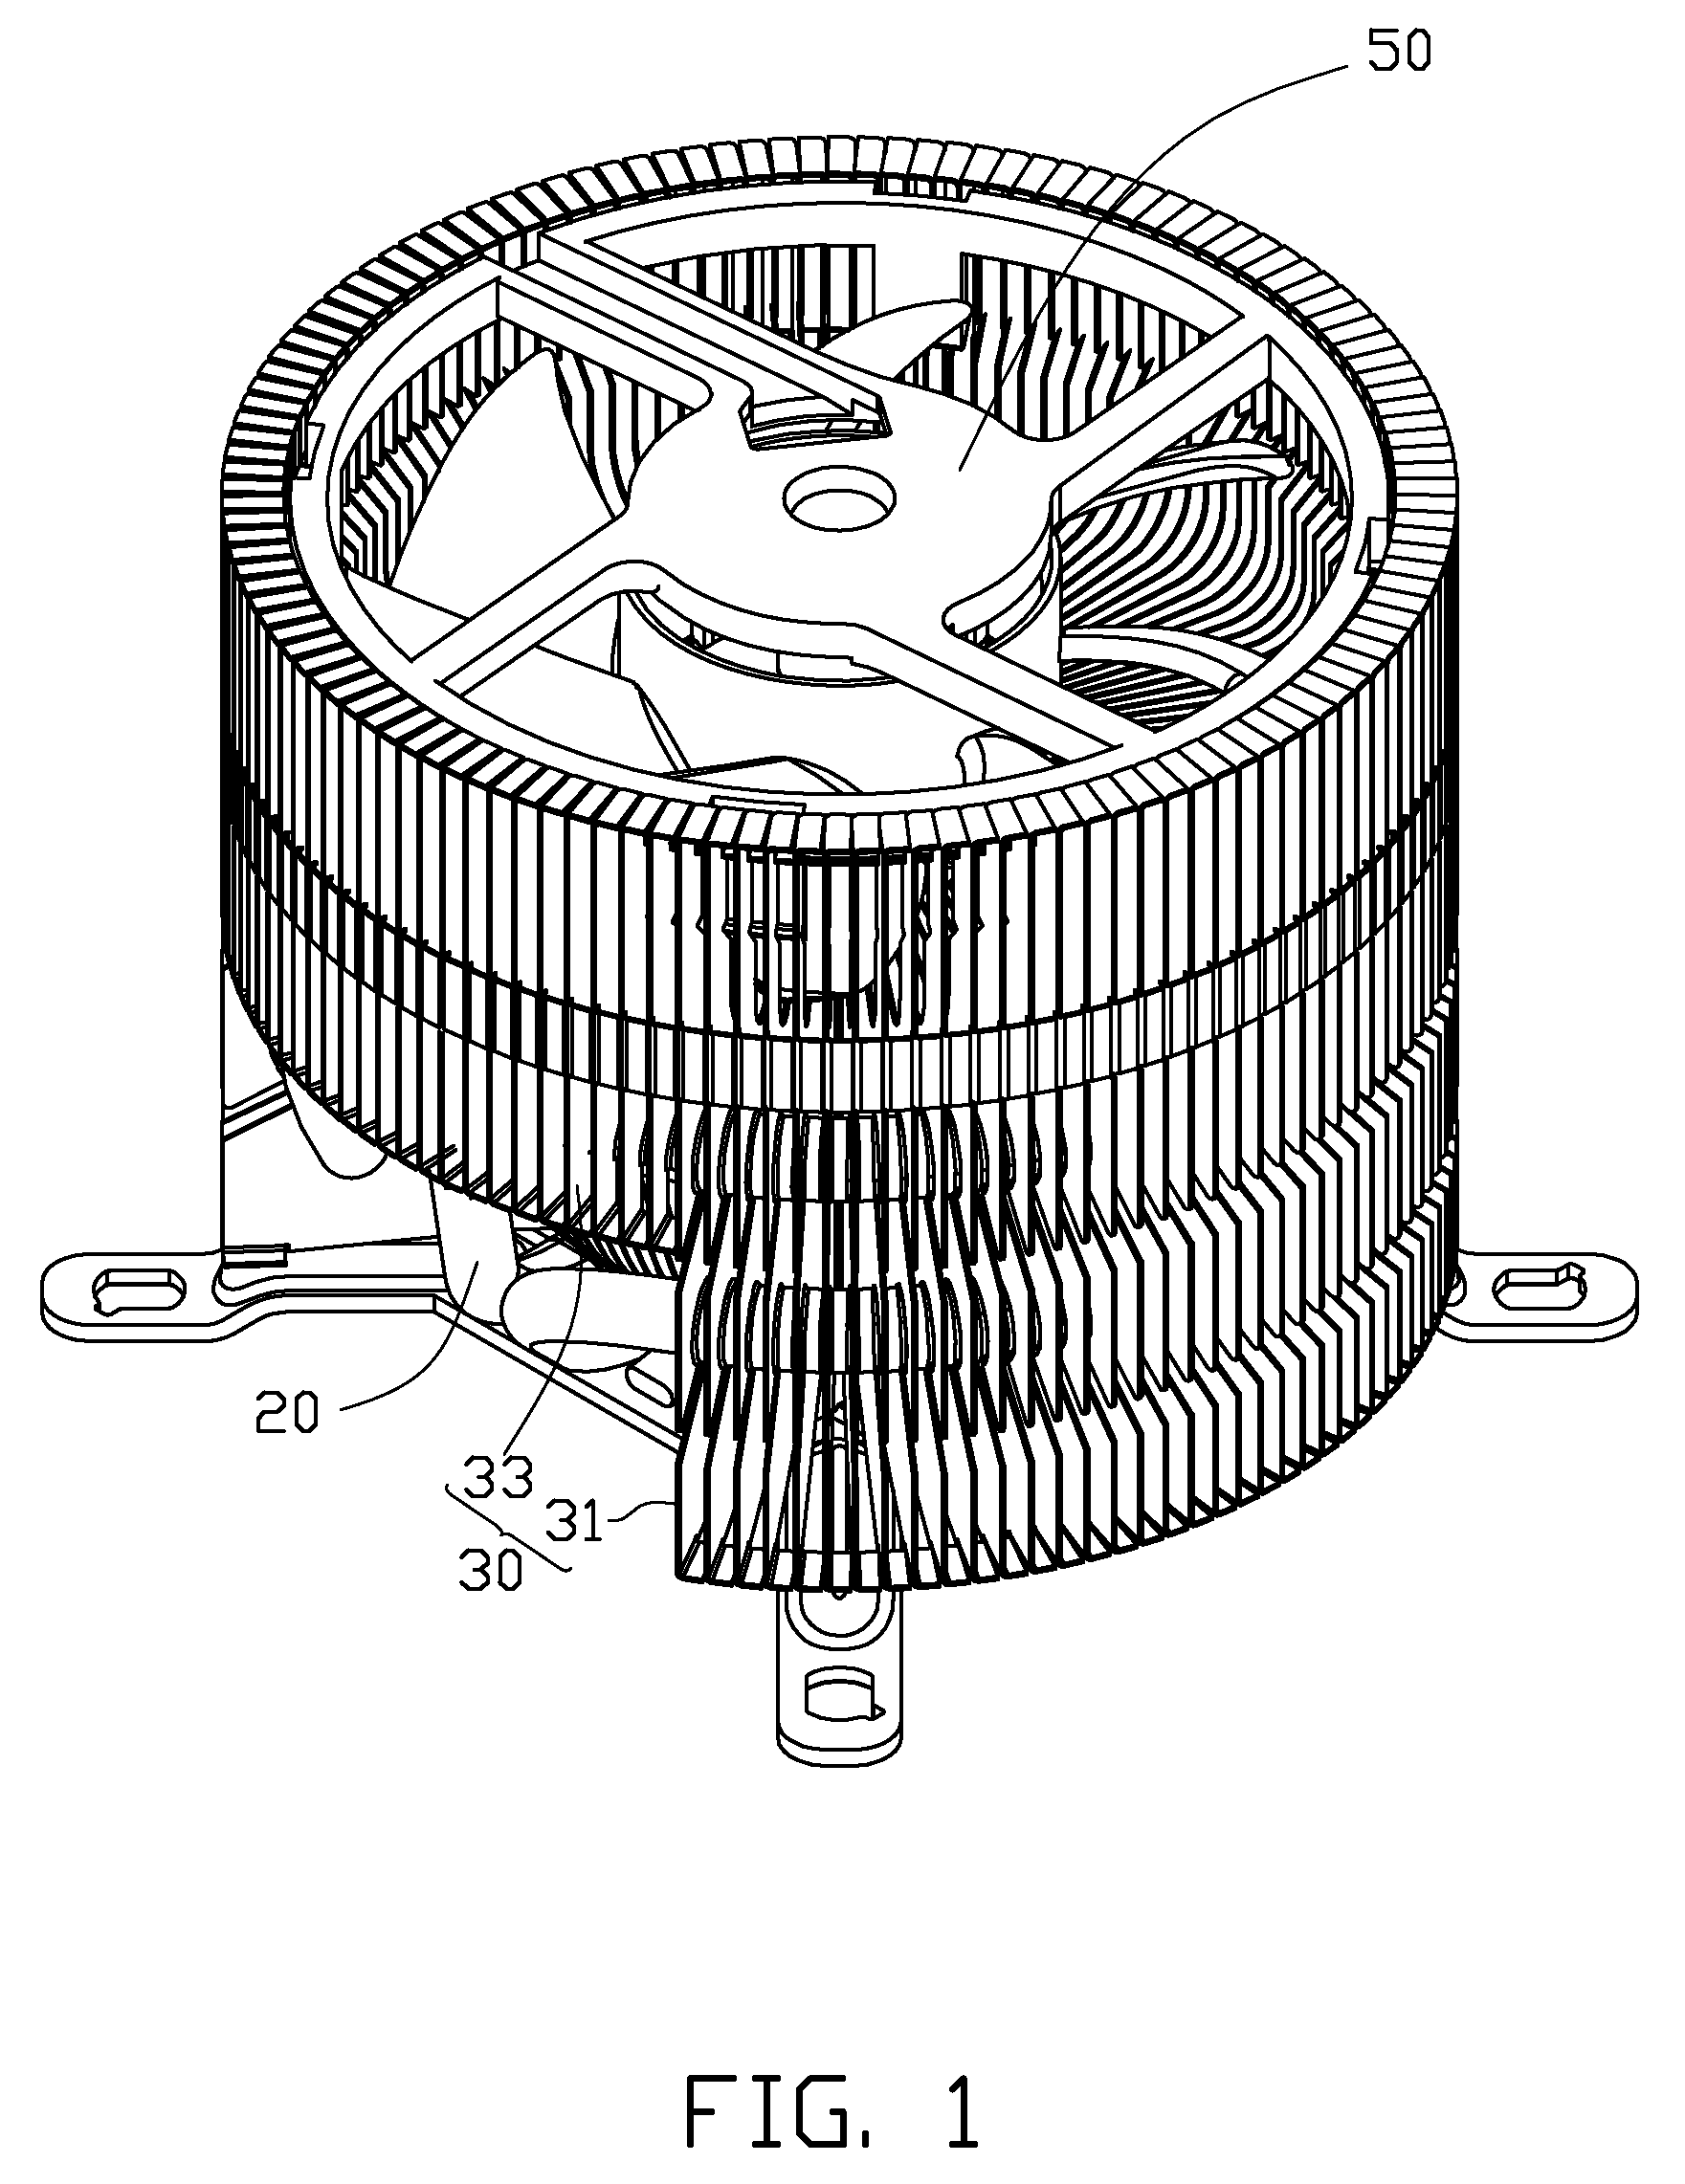 Heat dissipation apparatus having a fan received therein